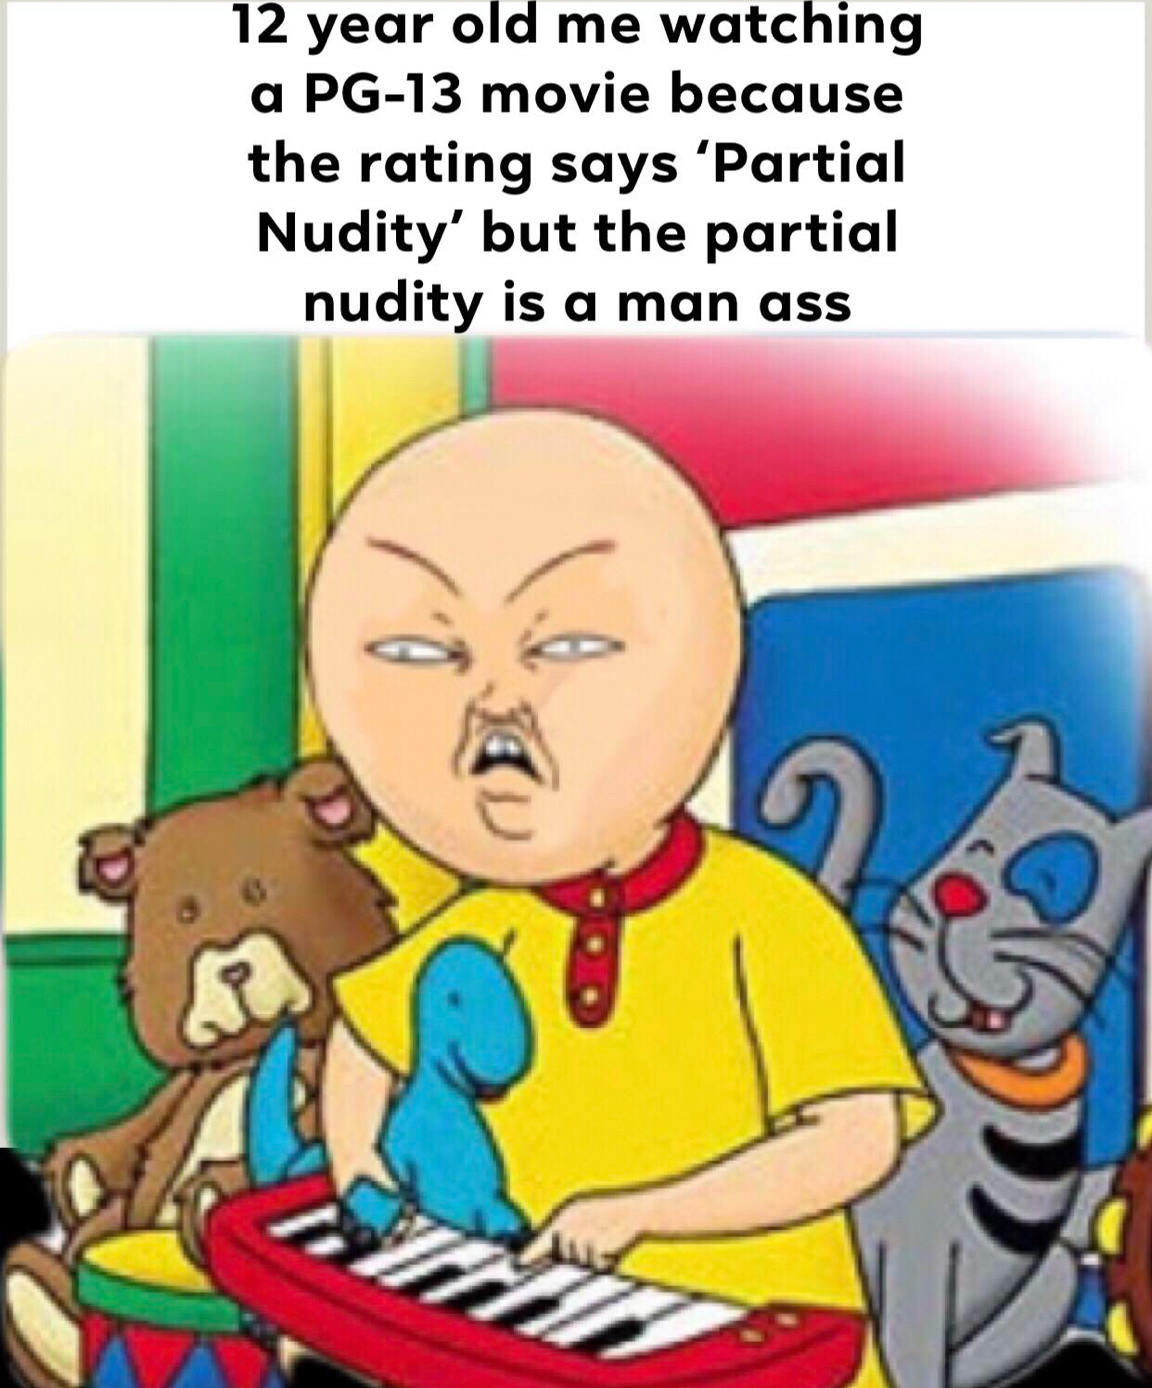 inventions for 6th graders - 12 year old me watching a Pg13 movie because the rating says 'Partial Nudity' but the partial nudity is a man ass